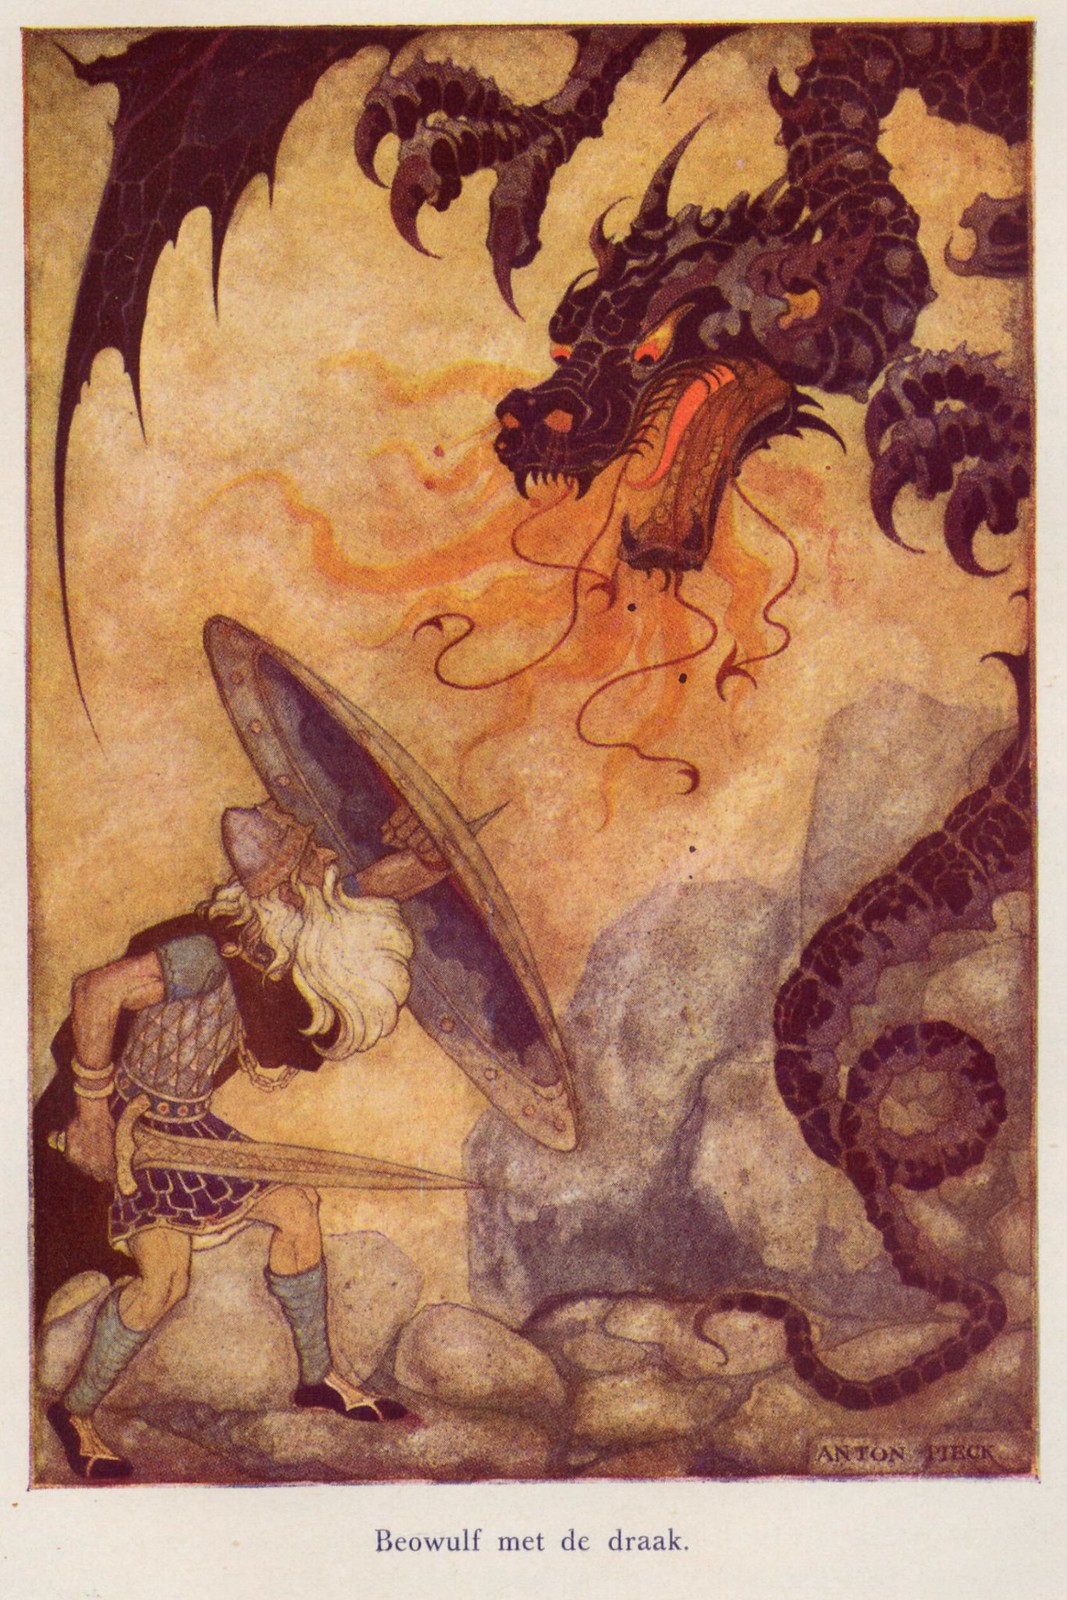 Anton Pieck - Illustration of Beowulf from "Heroes Of Mankind," 1941